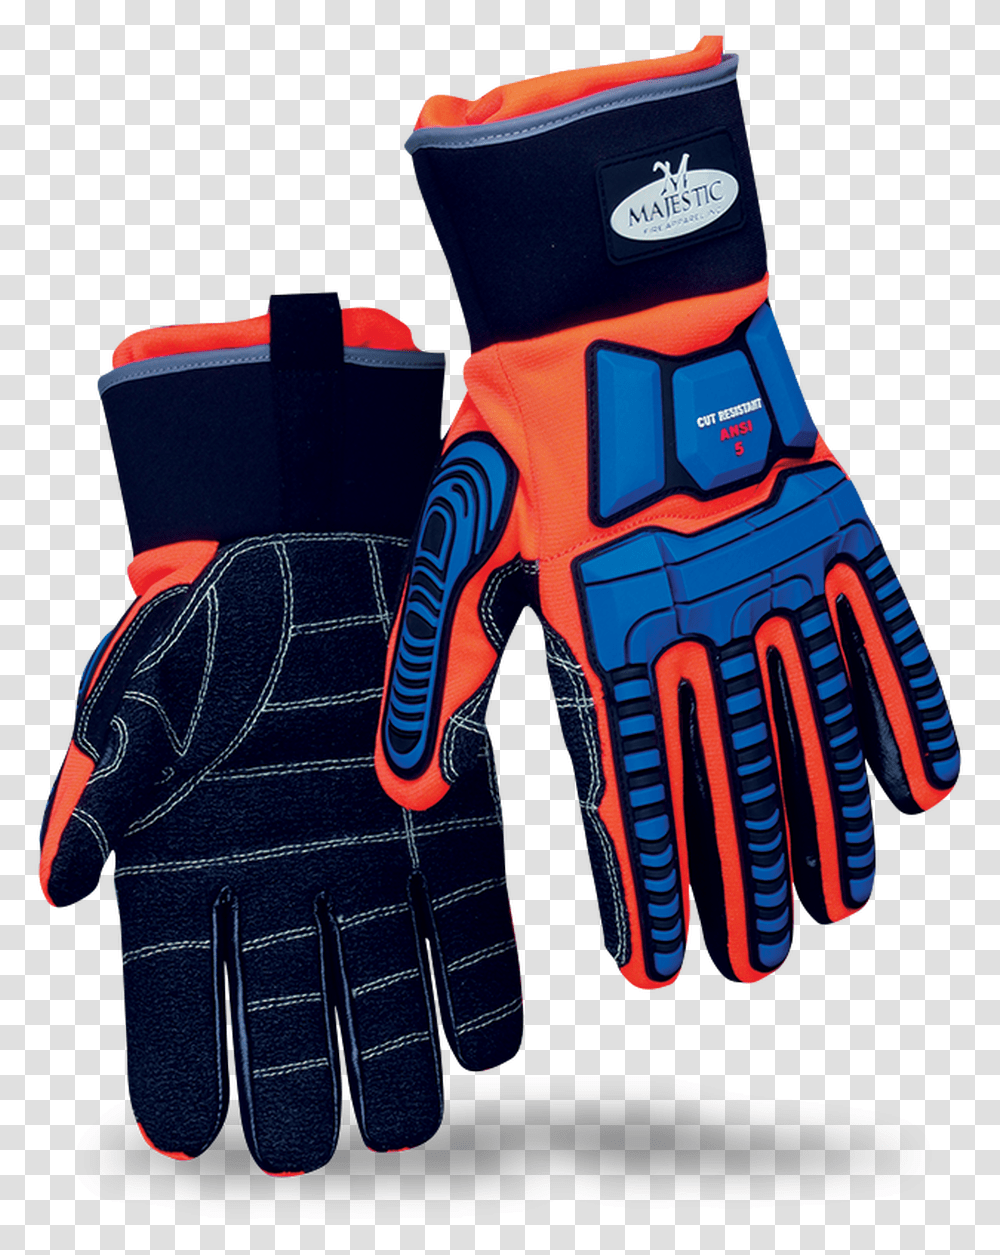 Majestic Oil Amp Gas Extrication Gloves W Blood Borne Extrication Gloves Bloodborne Pathogen, Apparel Transparent Png